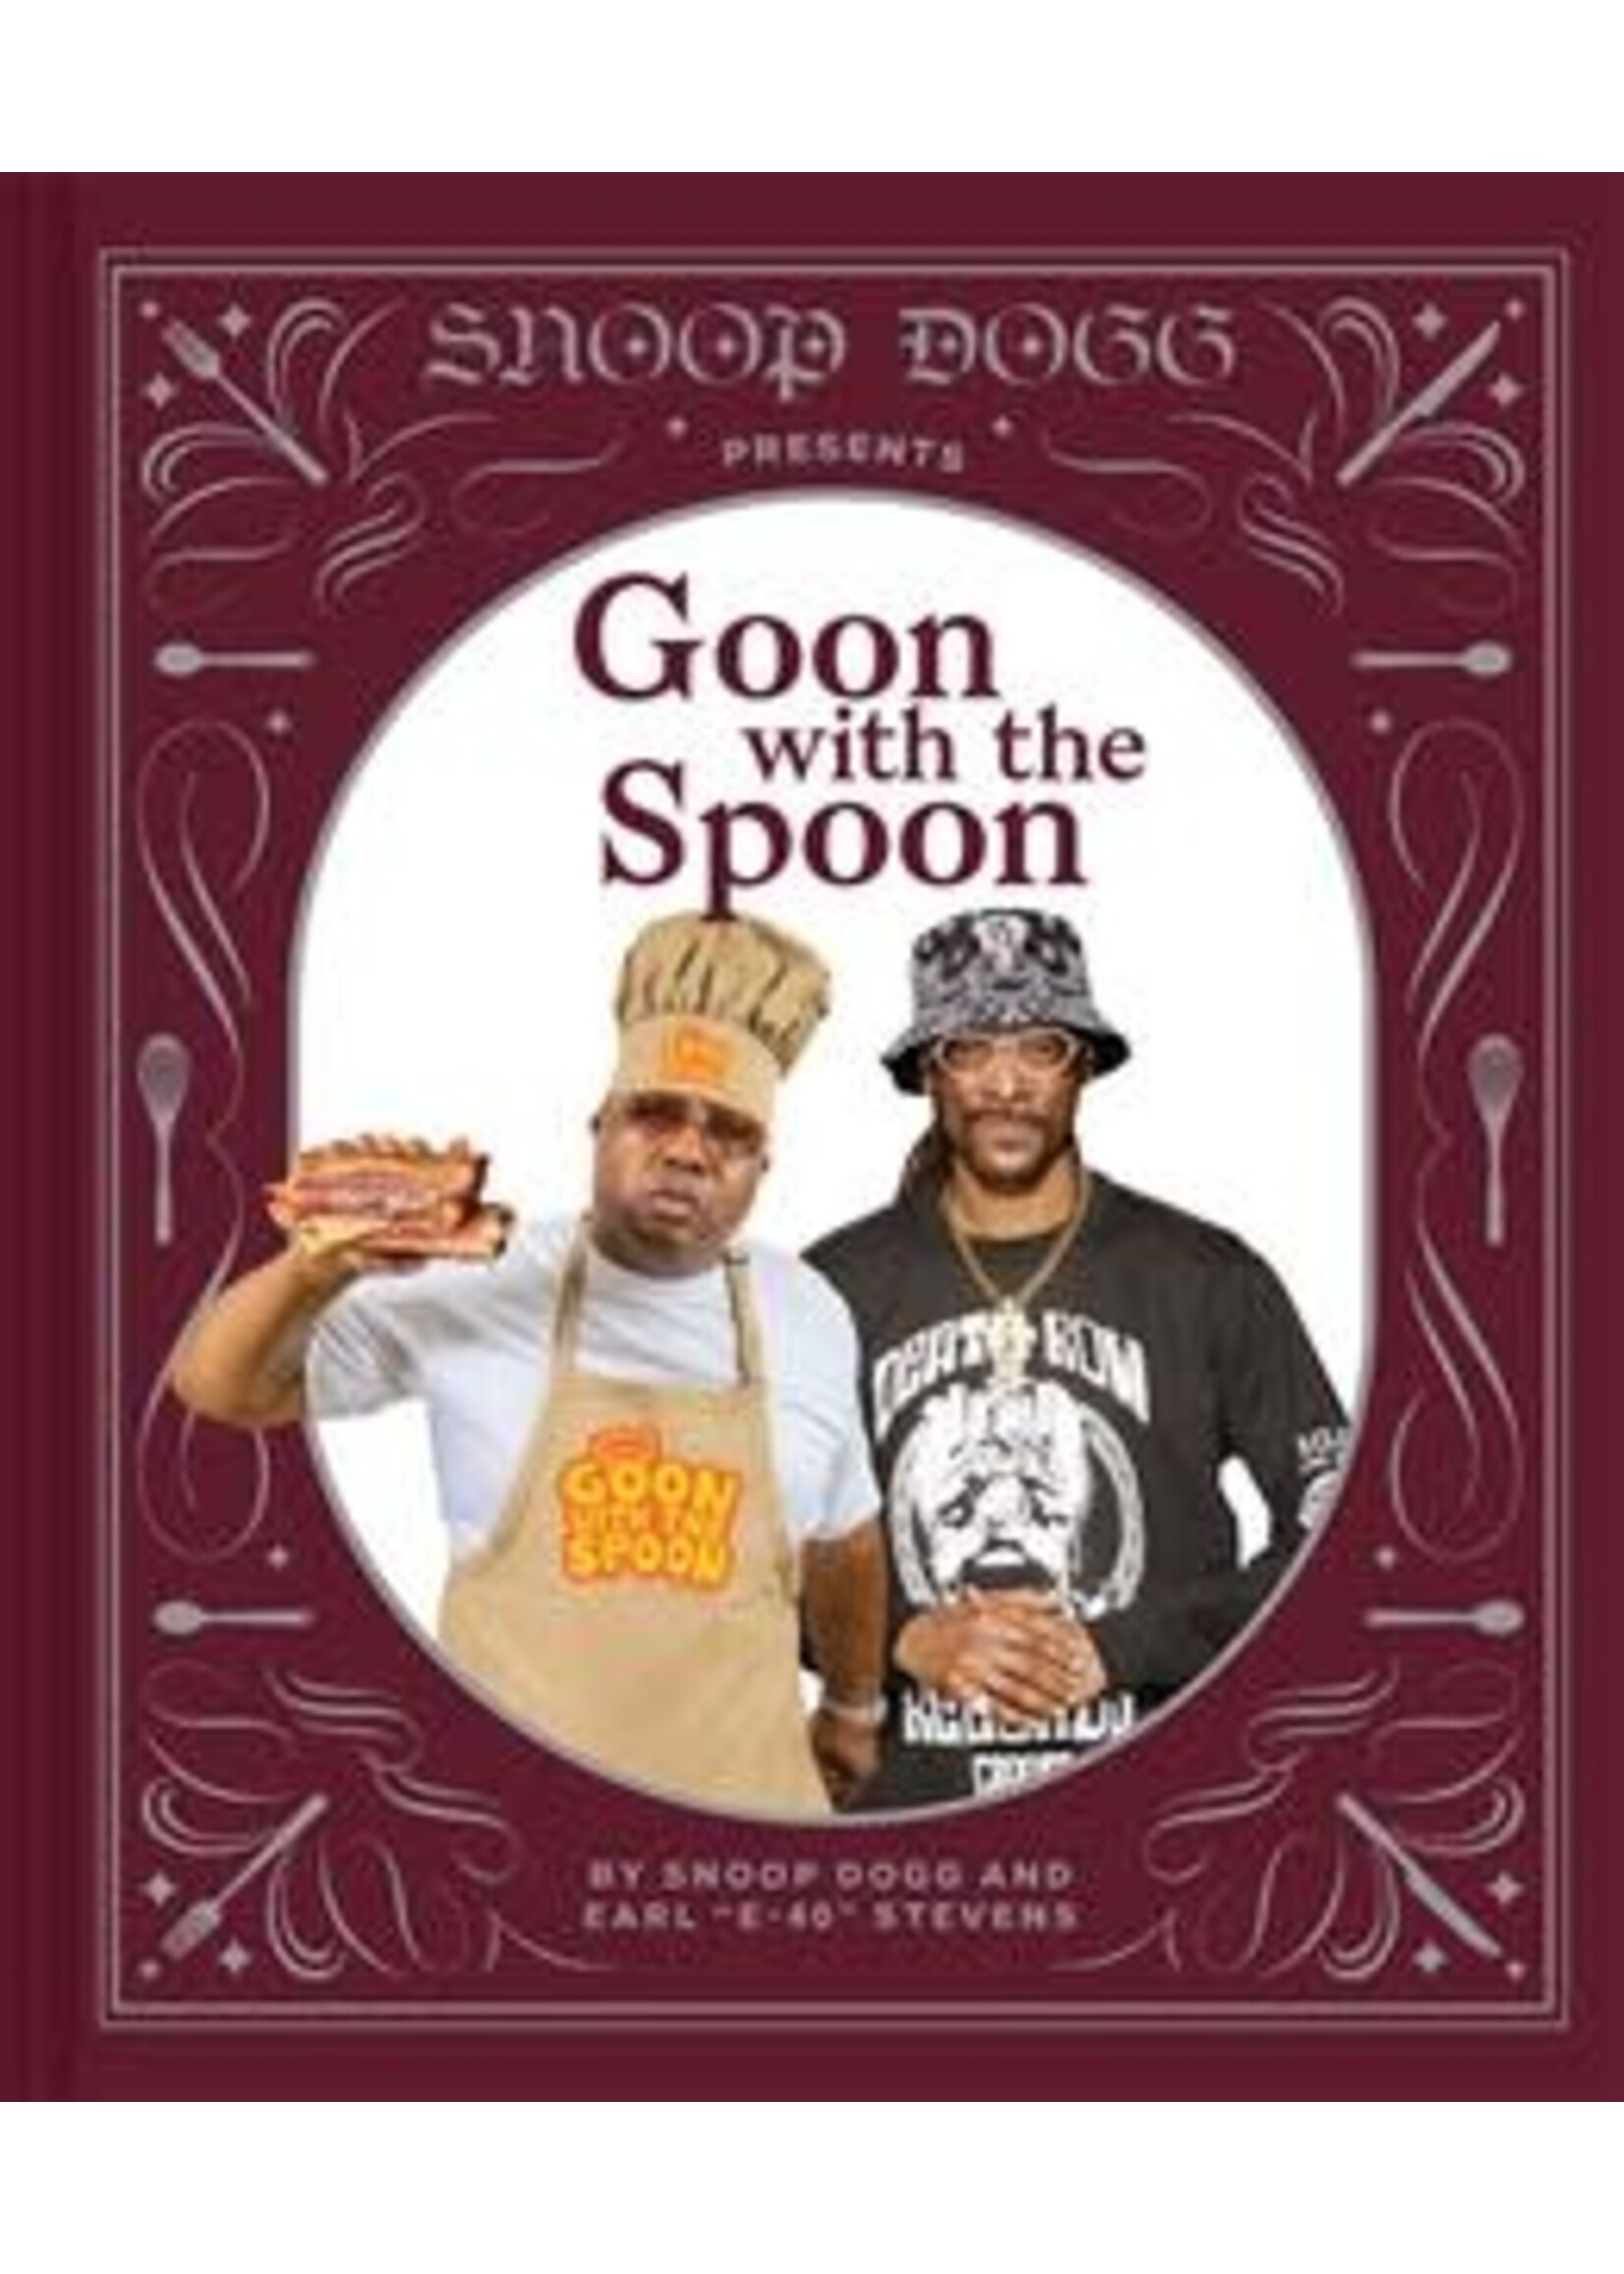 Snoop Dogg Presents: Goon with the Spoon by Snoop Dogg, Earl "E-40", Antonis Achilleos